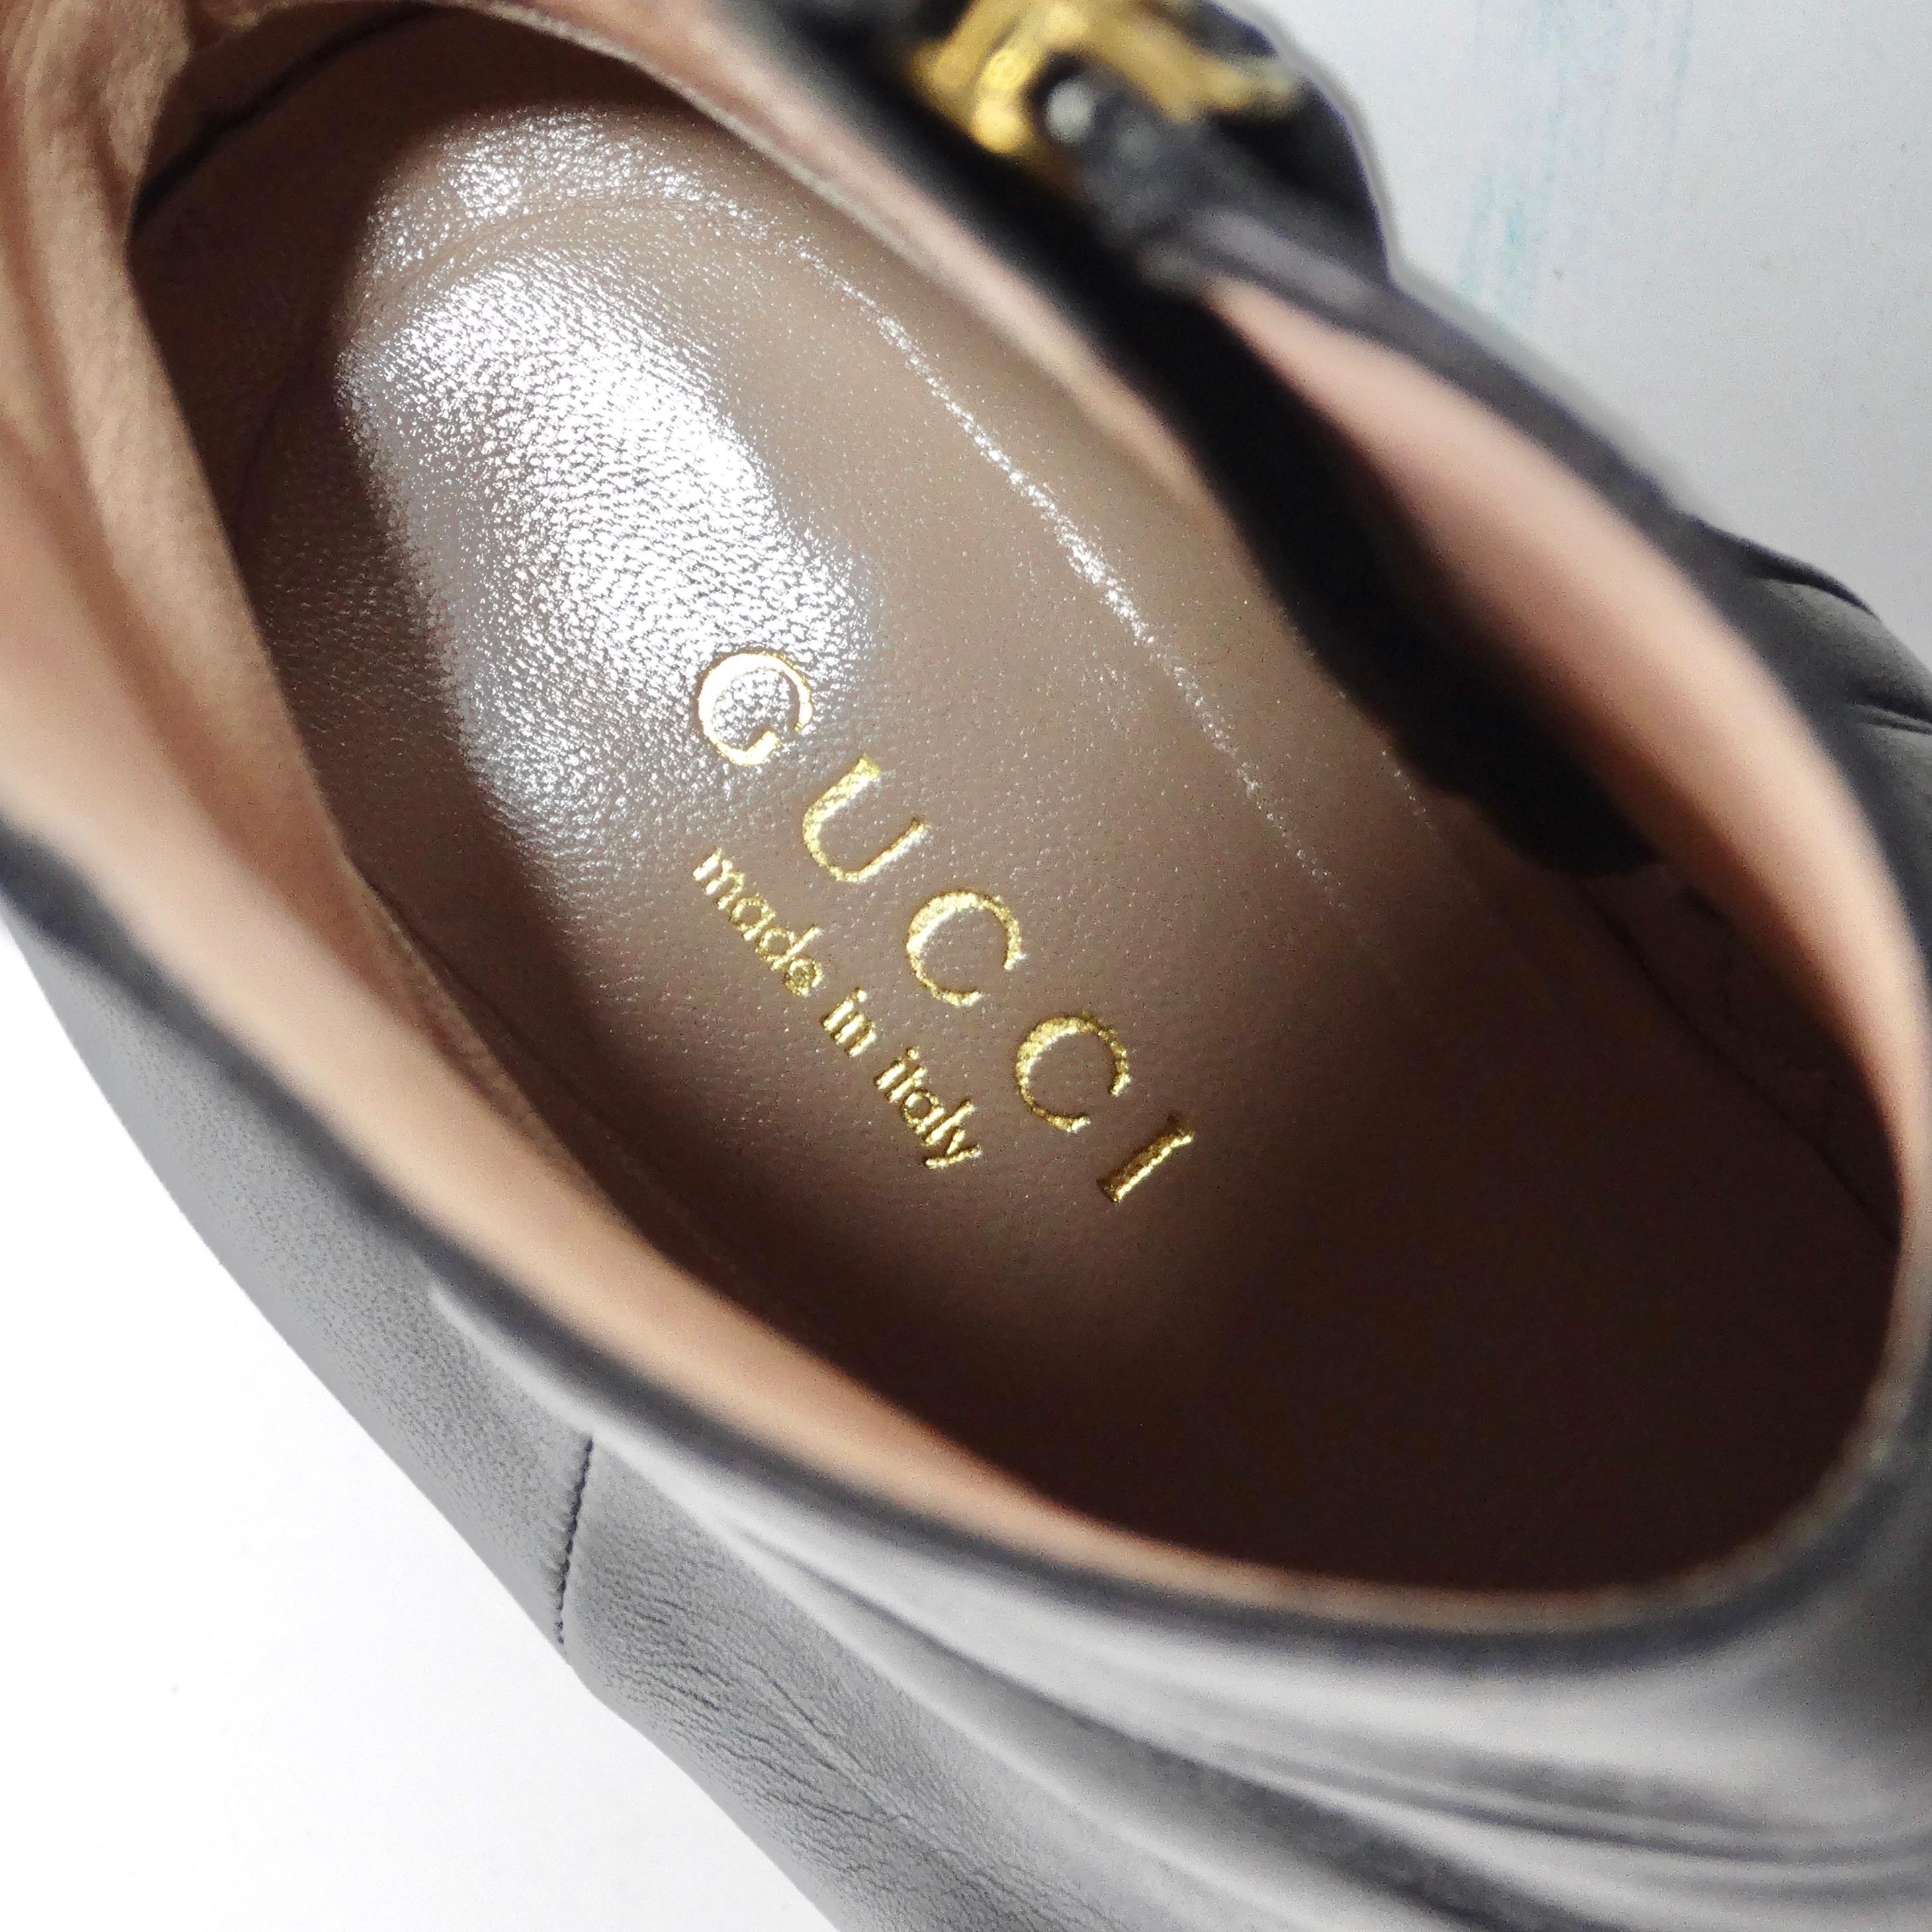 Gucci Leather Zumi Kitten Heel Ankle Boots For Sale 7